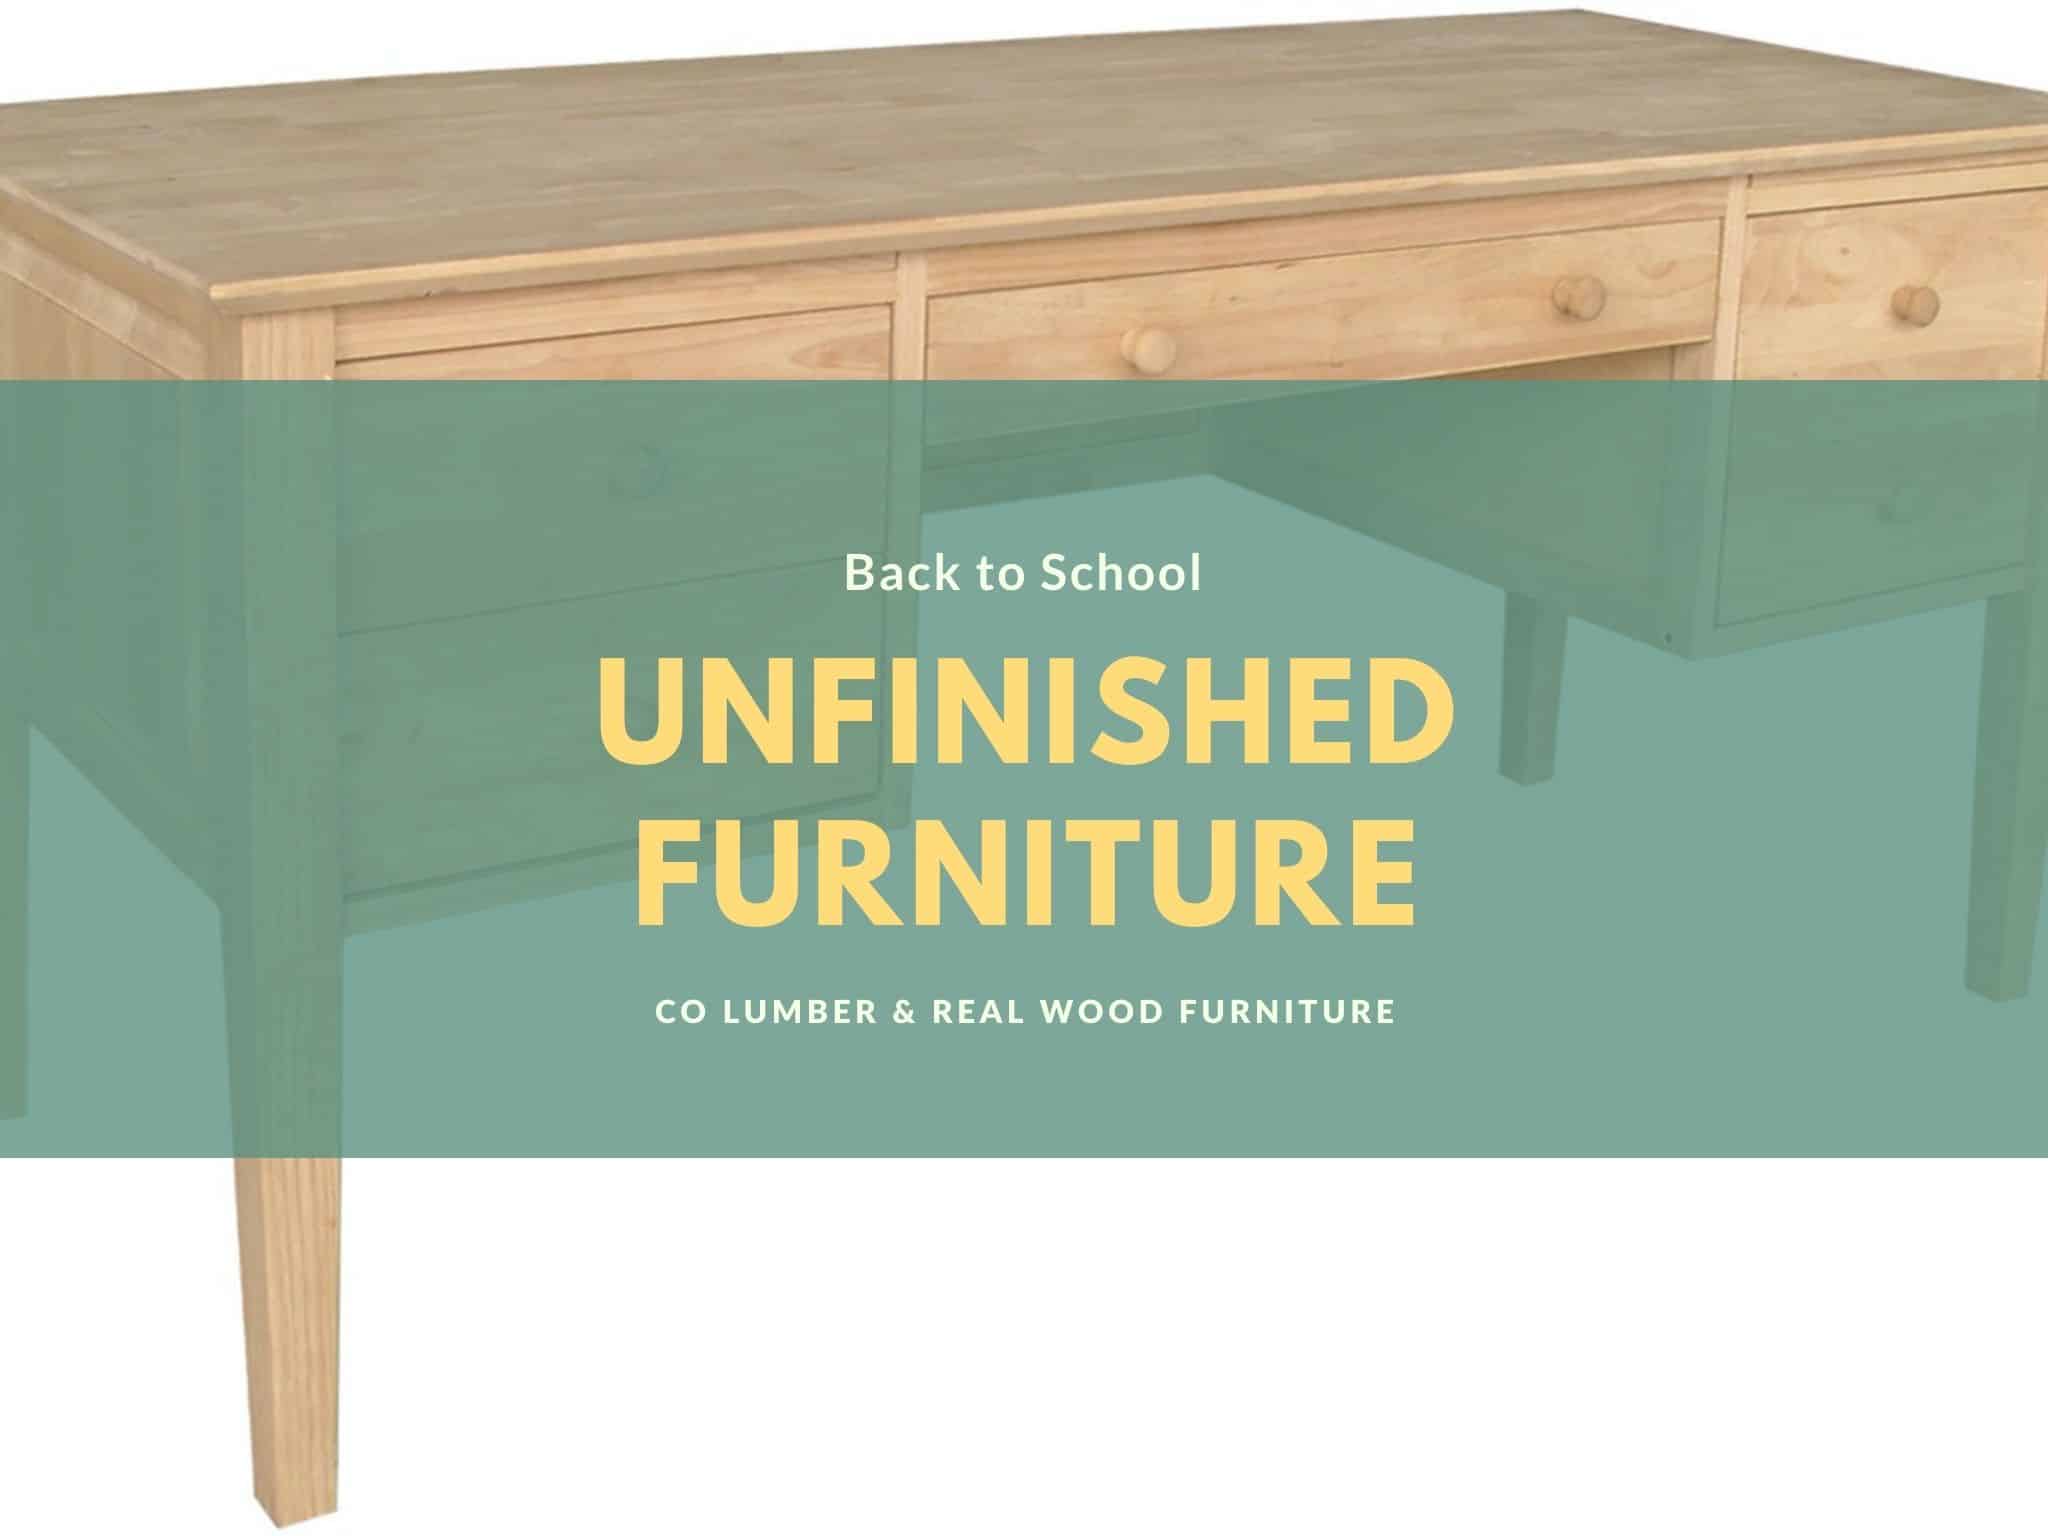 Unfinished Furniture Pieces Can Be Perfect for Back-to-School Needs